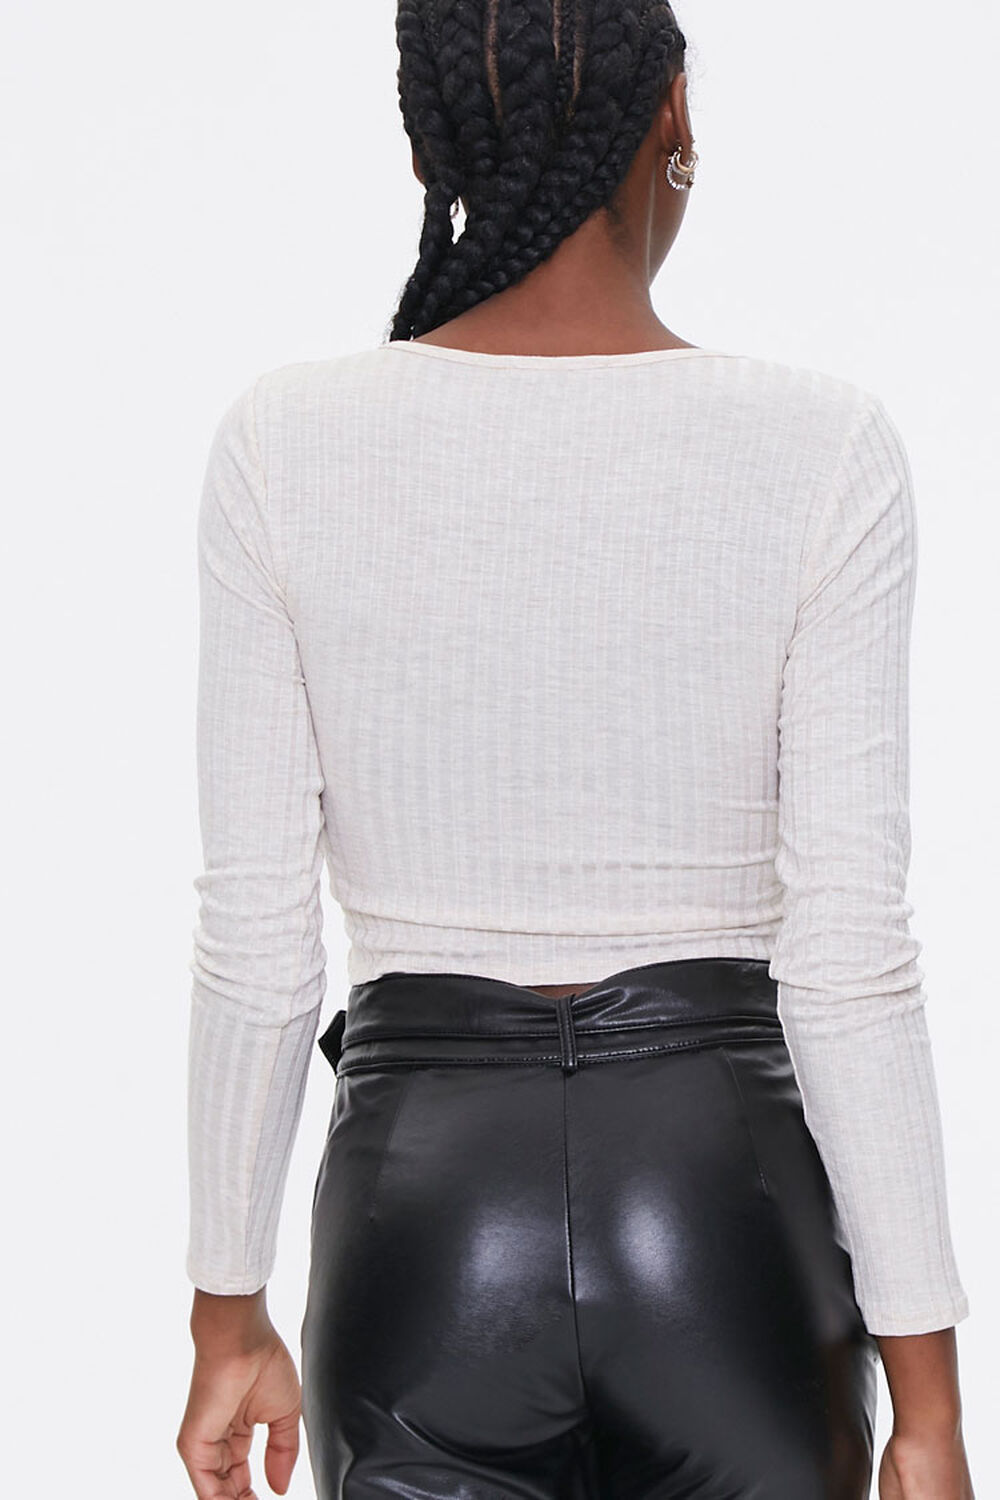 OATMEAL Ruched Rib-Knit Crop Top, image 3